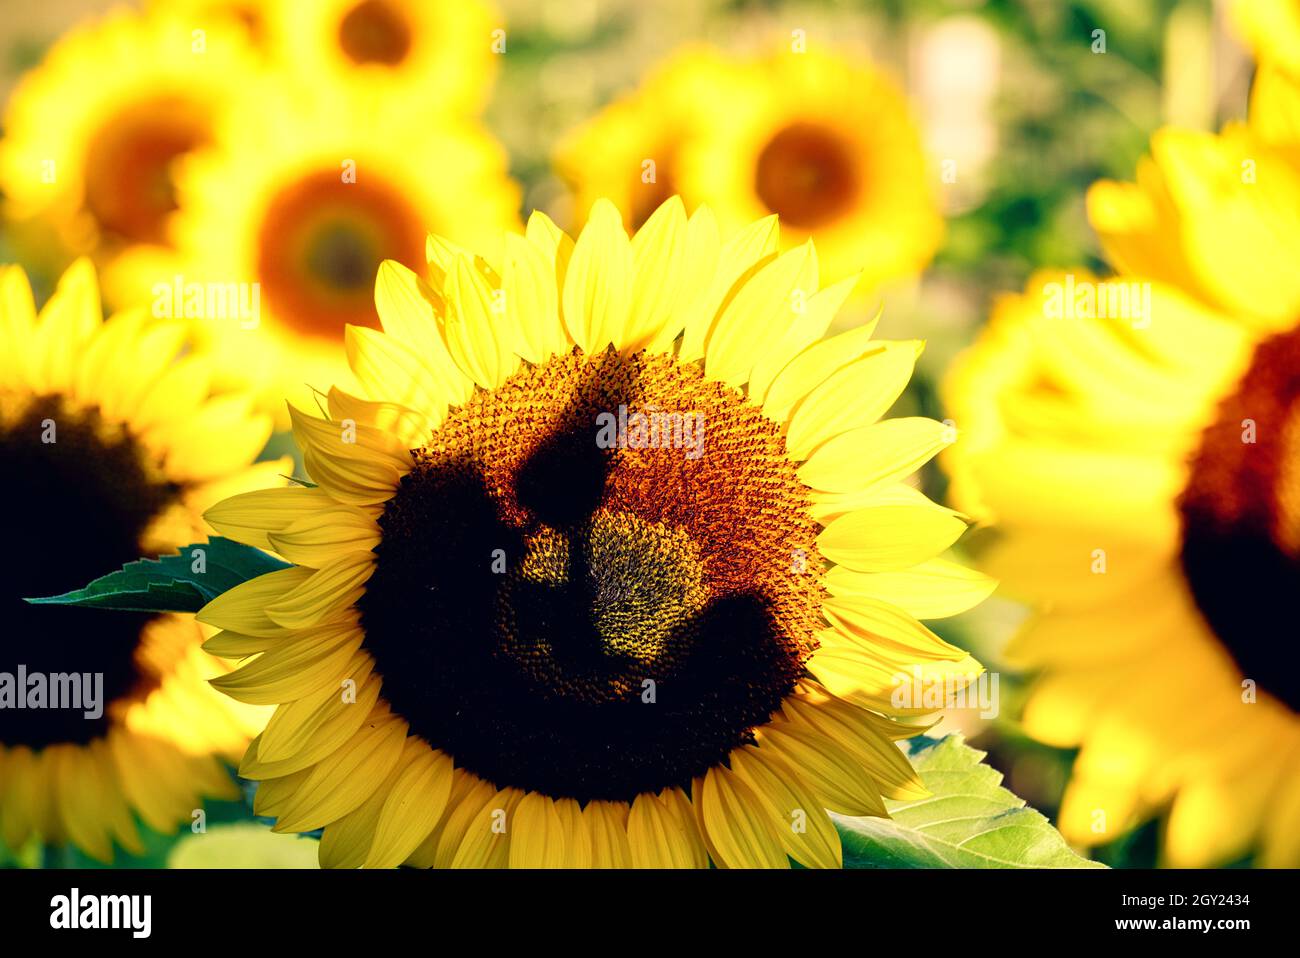 Shadow on sunflower head (Helianthus Annuus) in vivid vibrant field of sunflowers. Concept of optimistic, positivity, happiness Stock Photo